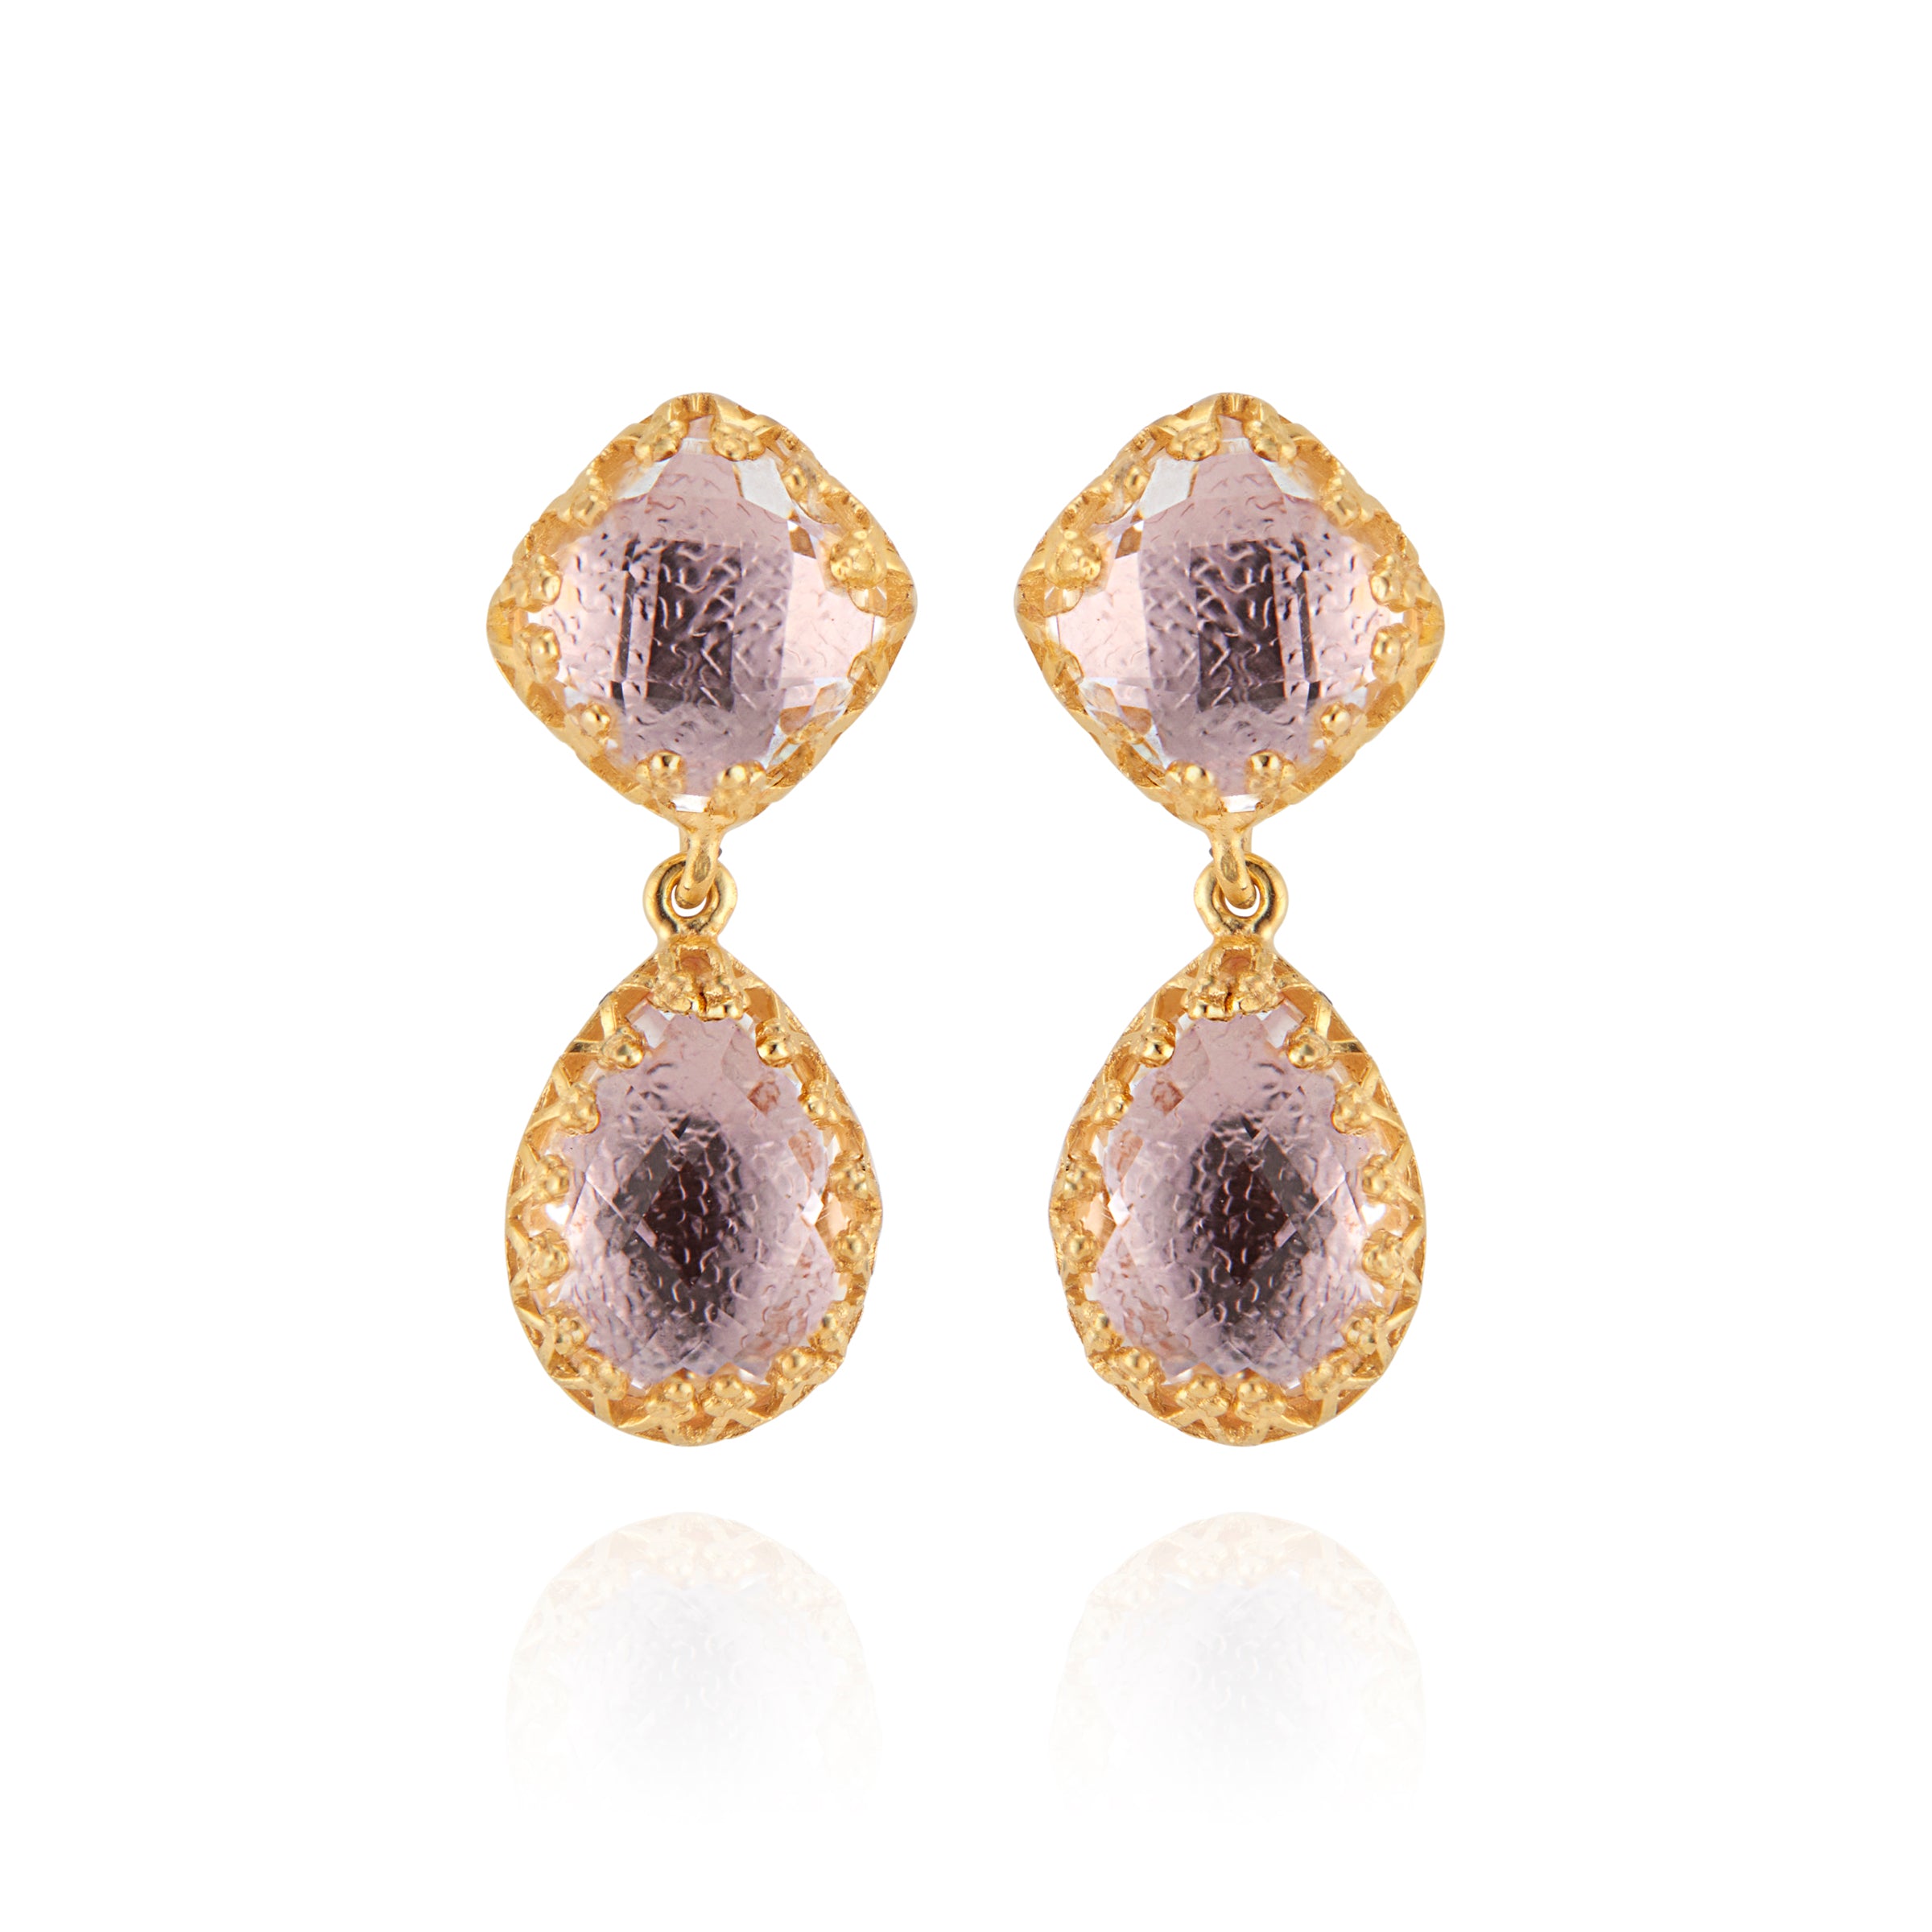 Jane Small Day Night Earrings (Black Rhodium or Yellow Gold Wash)